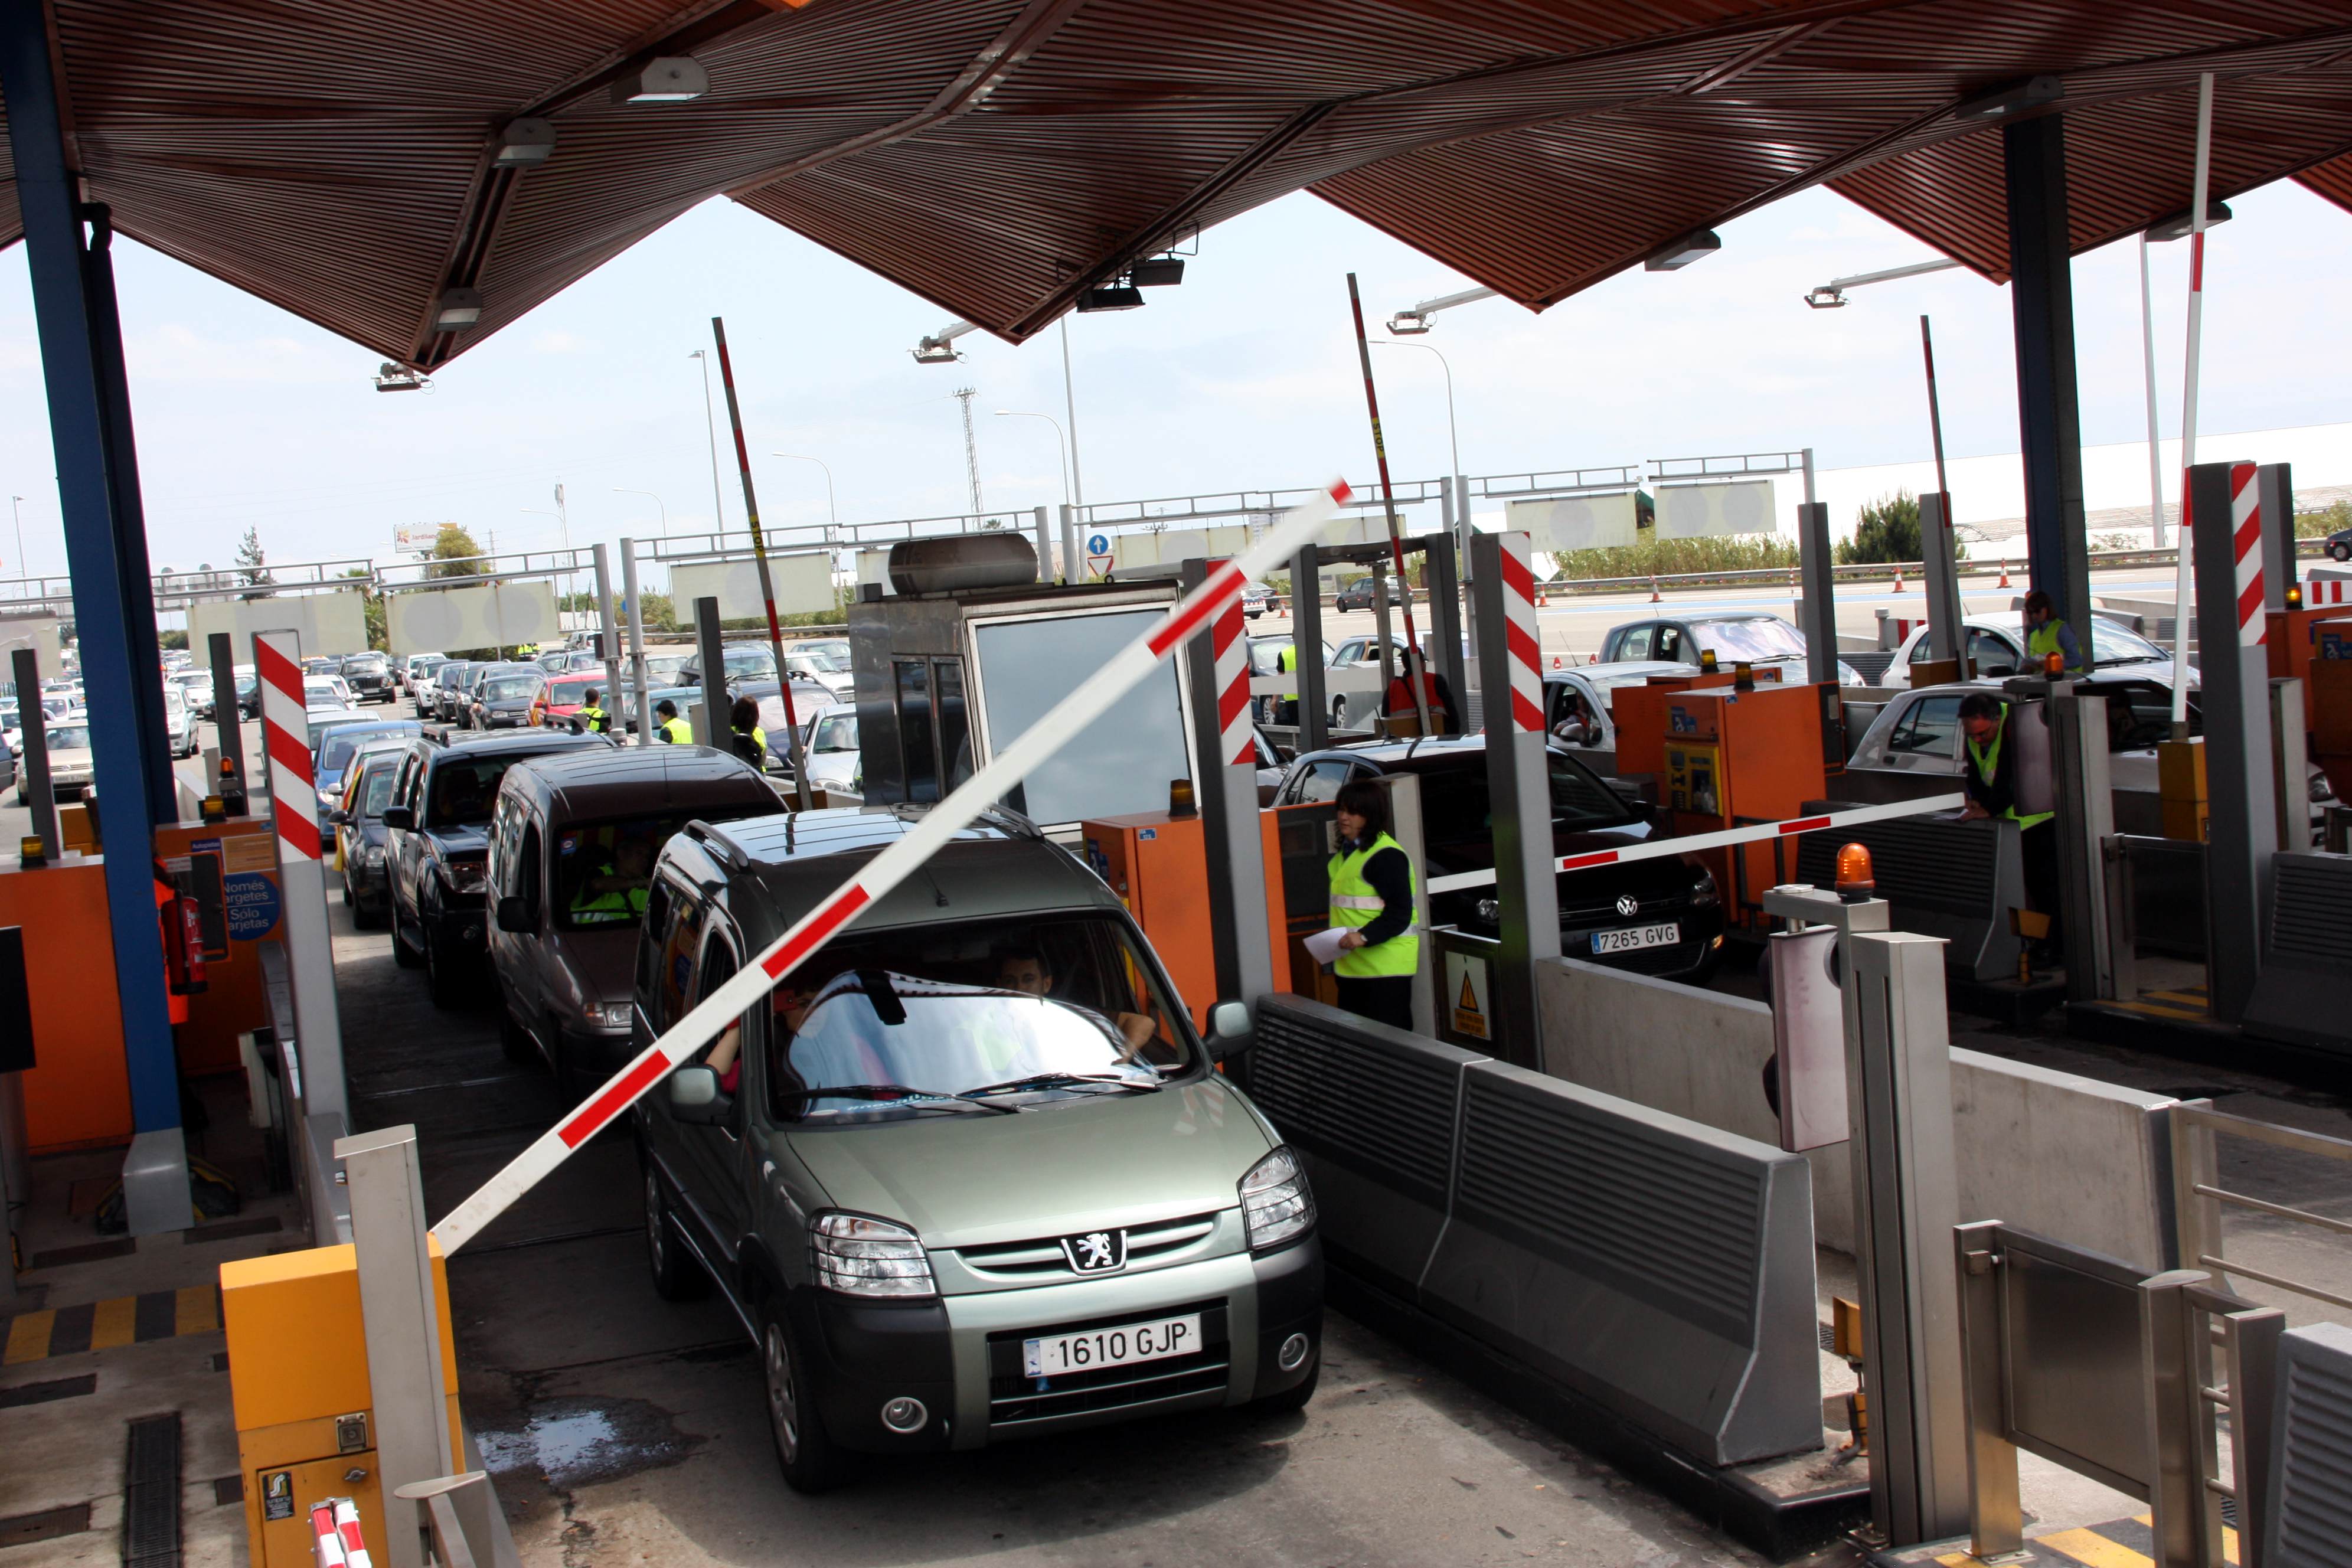 Activists protest at a toll booth in Vilassar de Mar during the 'no vull pagar' campaign in 2012 (by Jordi Polinario)